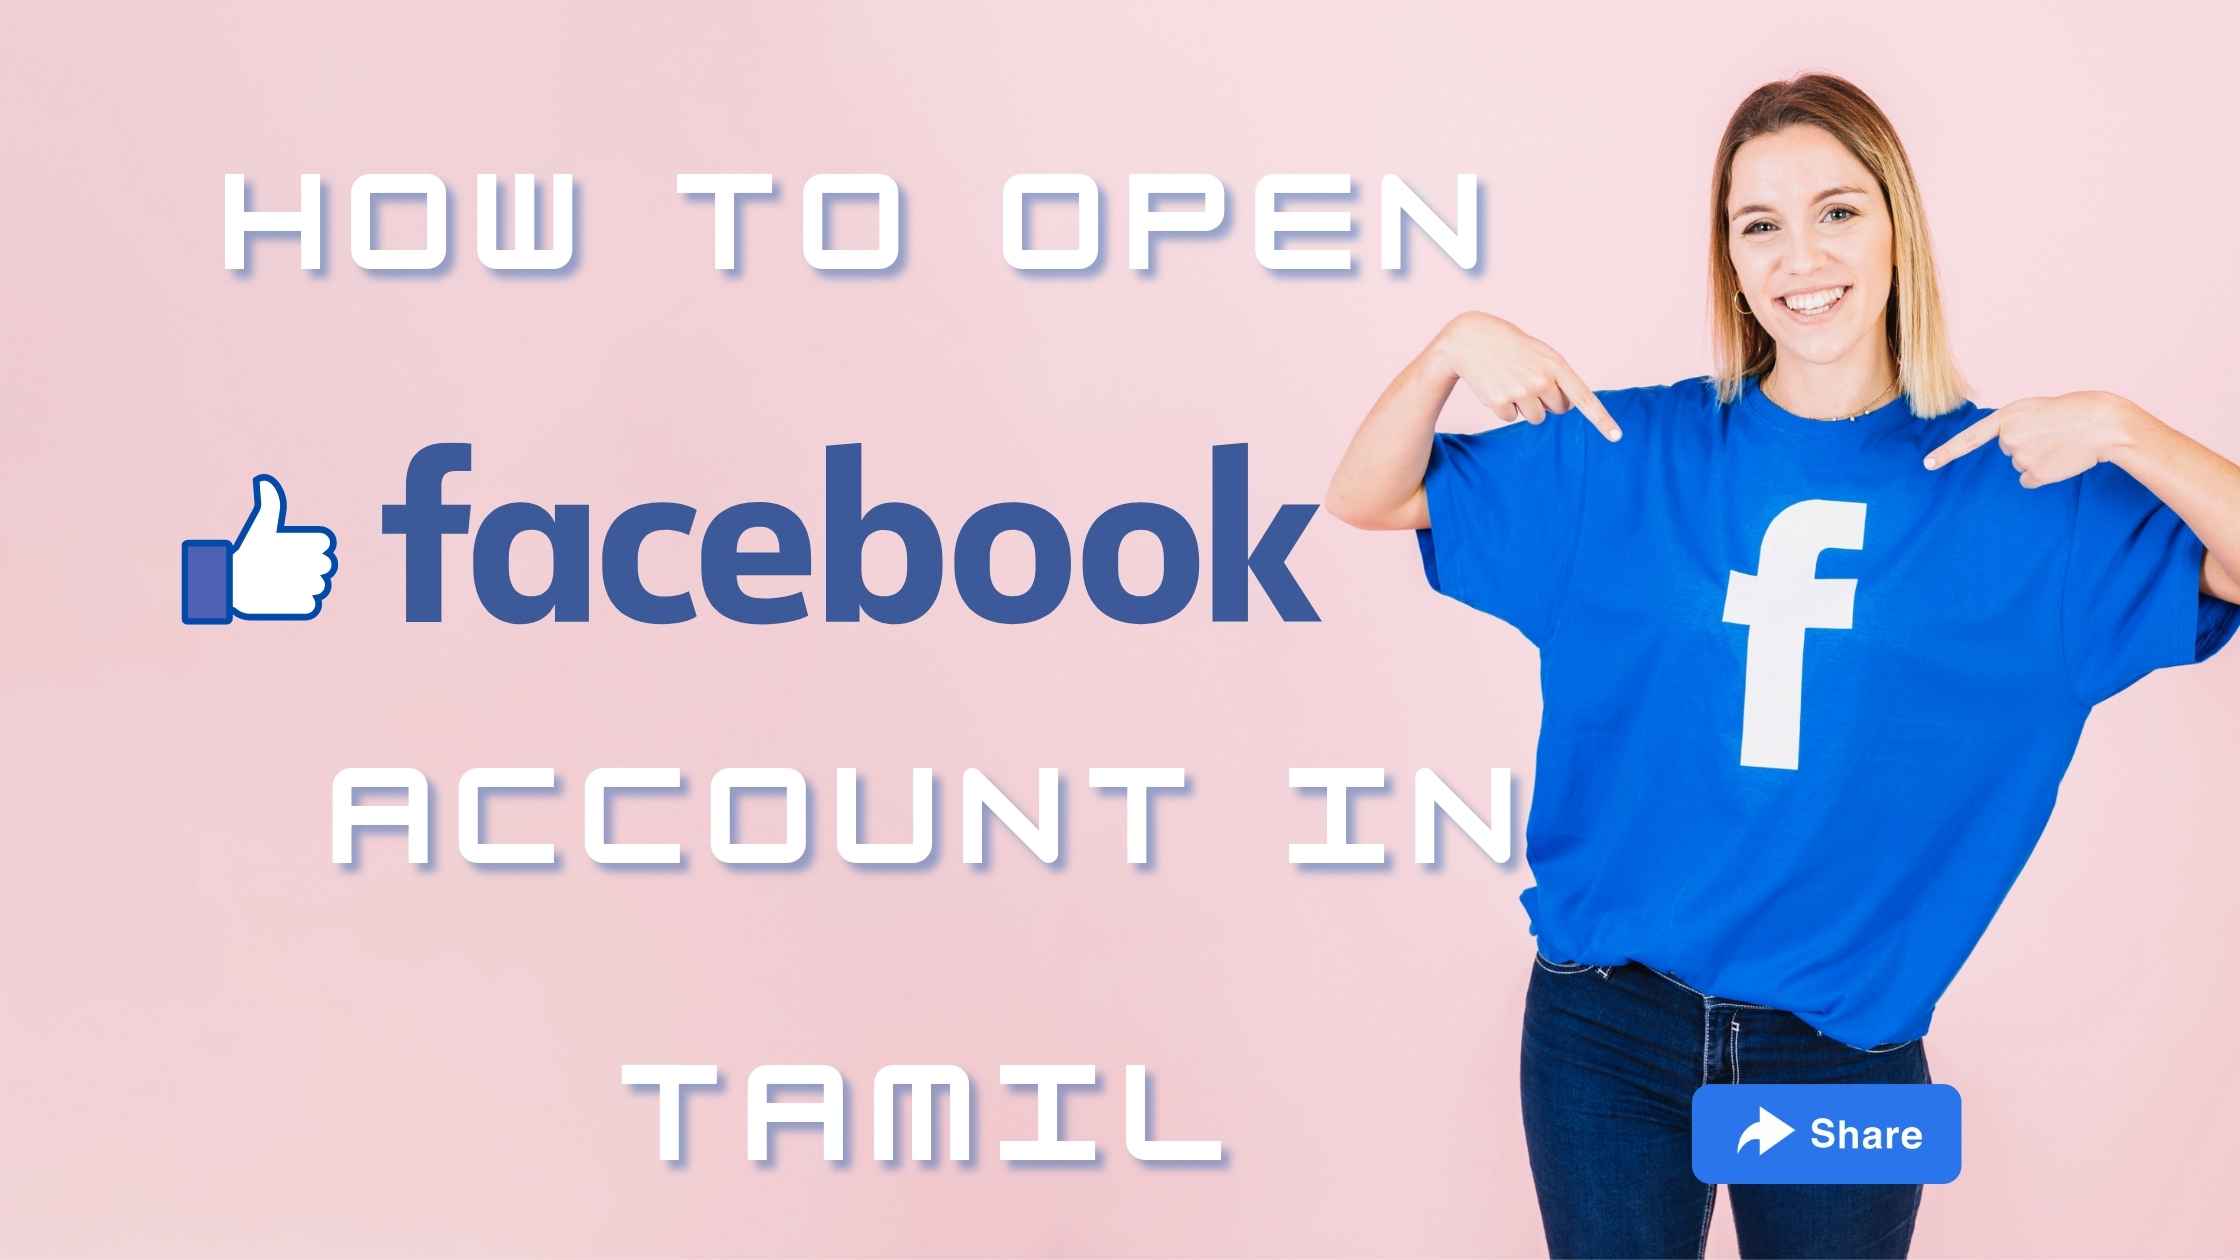 How To Open Account in Facebook in Tamil